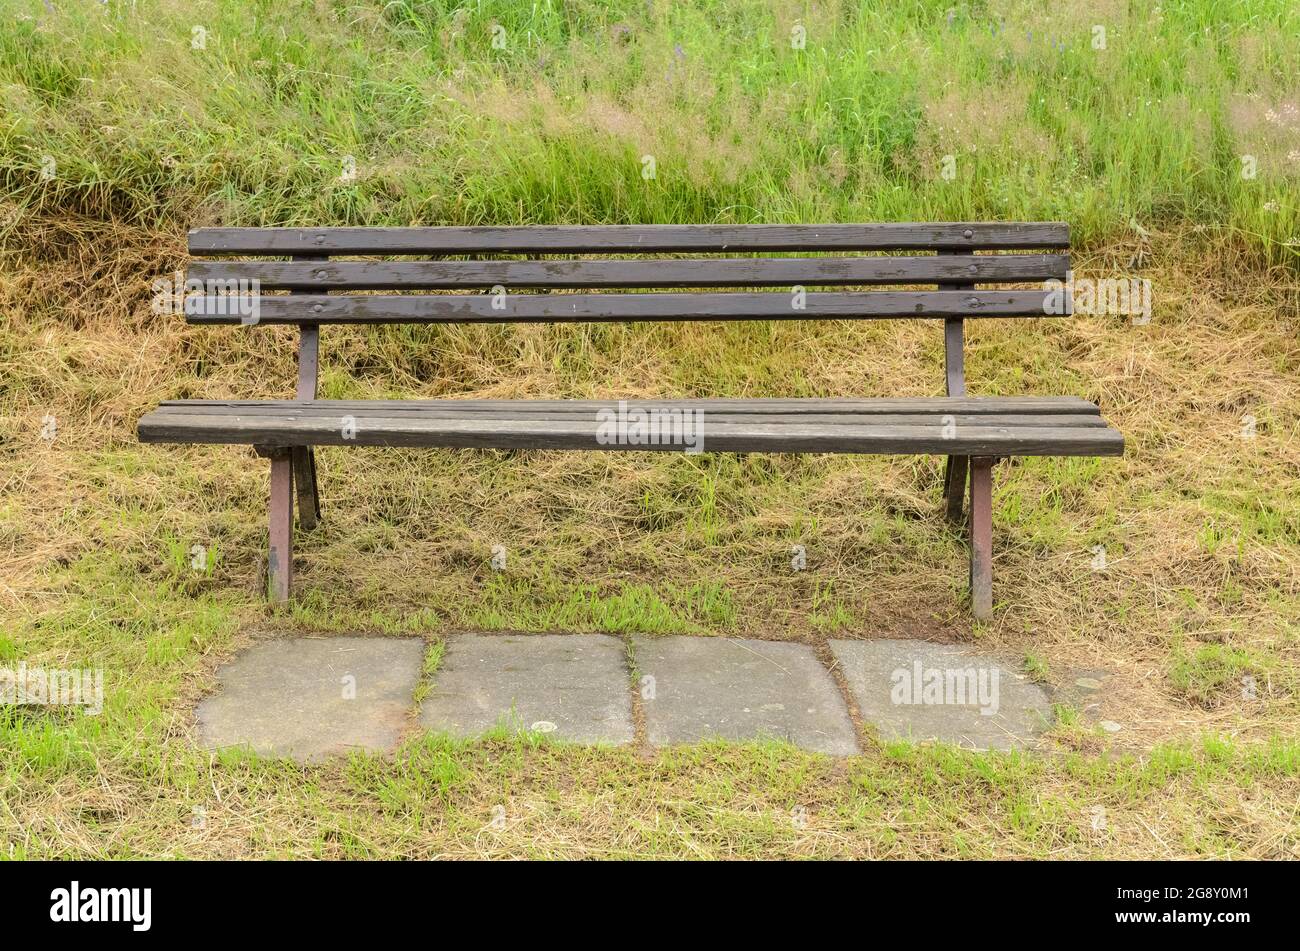 Wooden park bench in the rural countryside Stock Photo